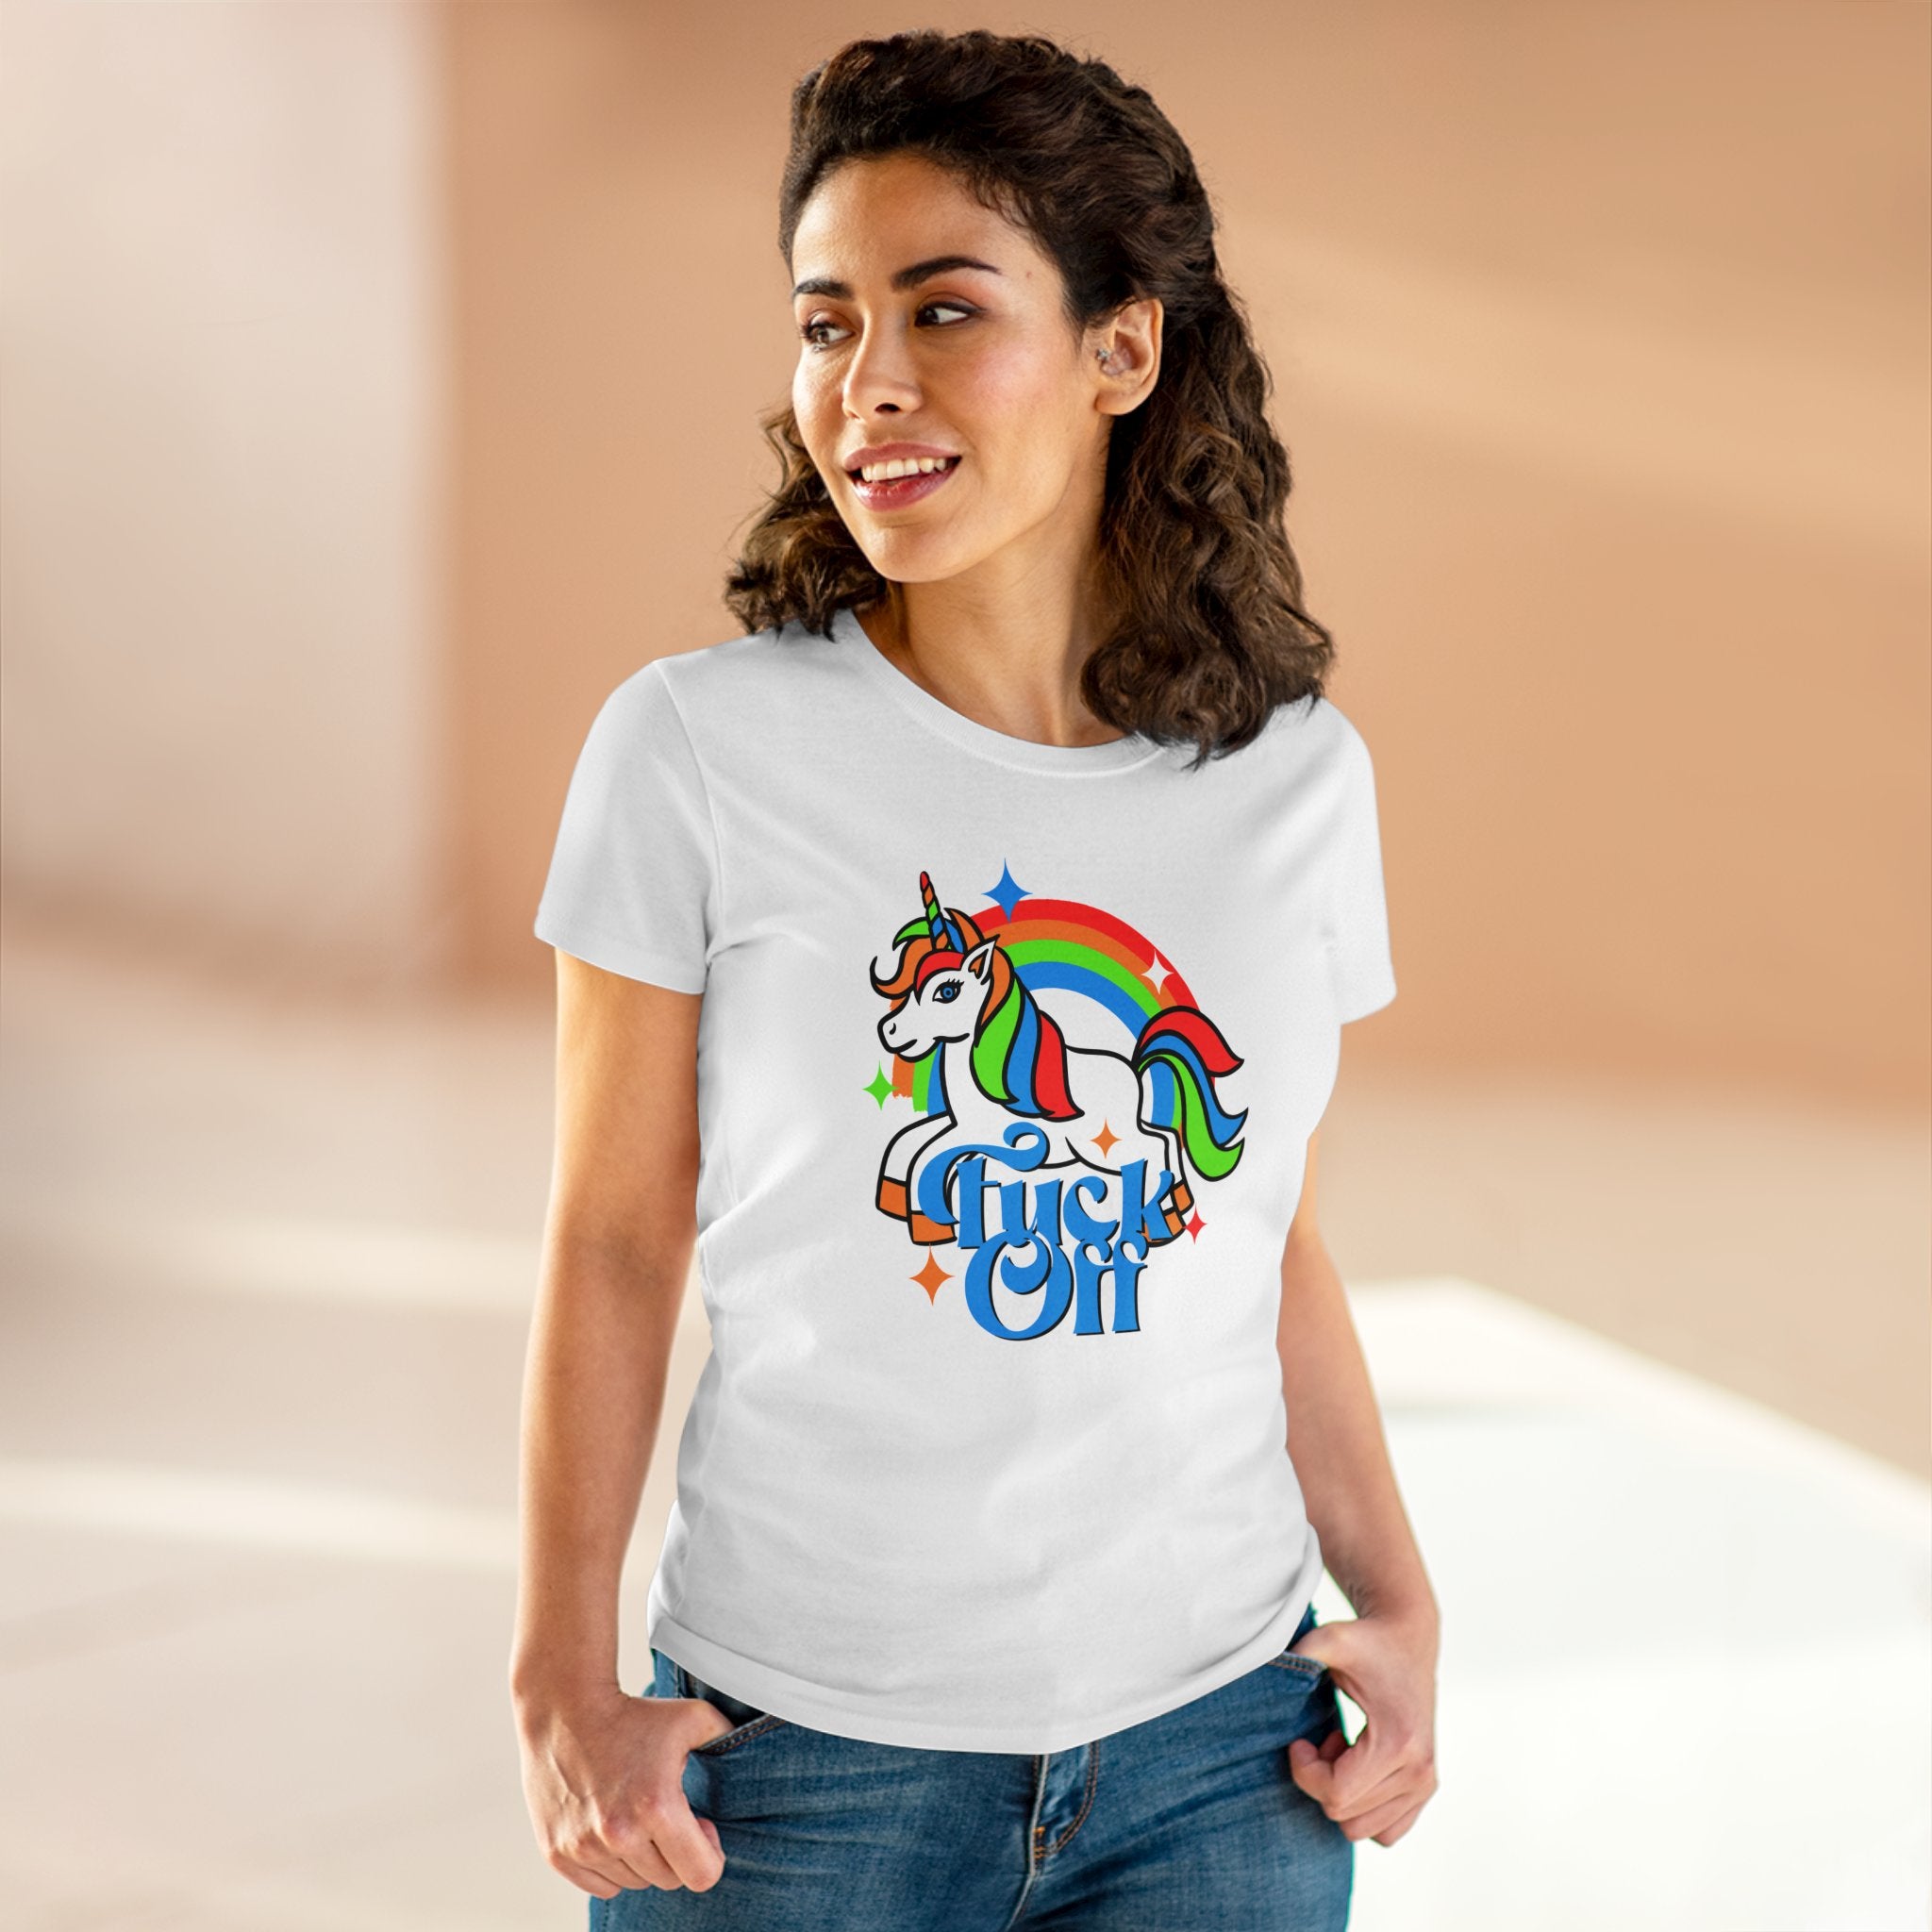 A woman stands indoors wearing an F Off - Women's Tee made of lightweight cotton, adorned with a bold design featuring a colorful unicorn and rainbow graphic that says "Magical AF.